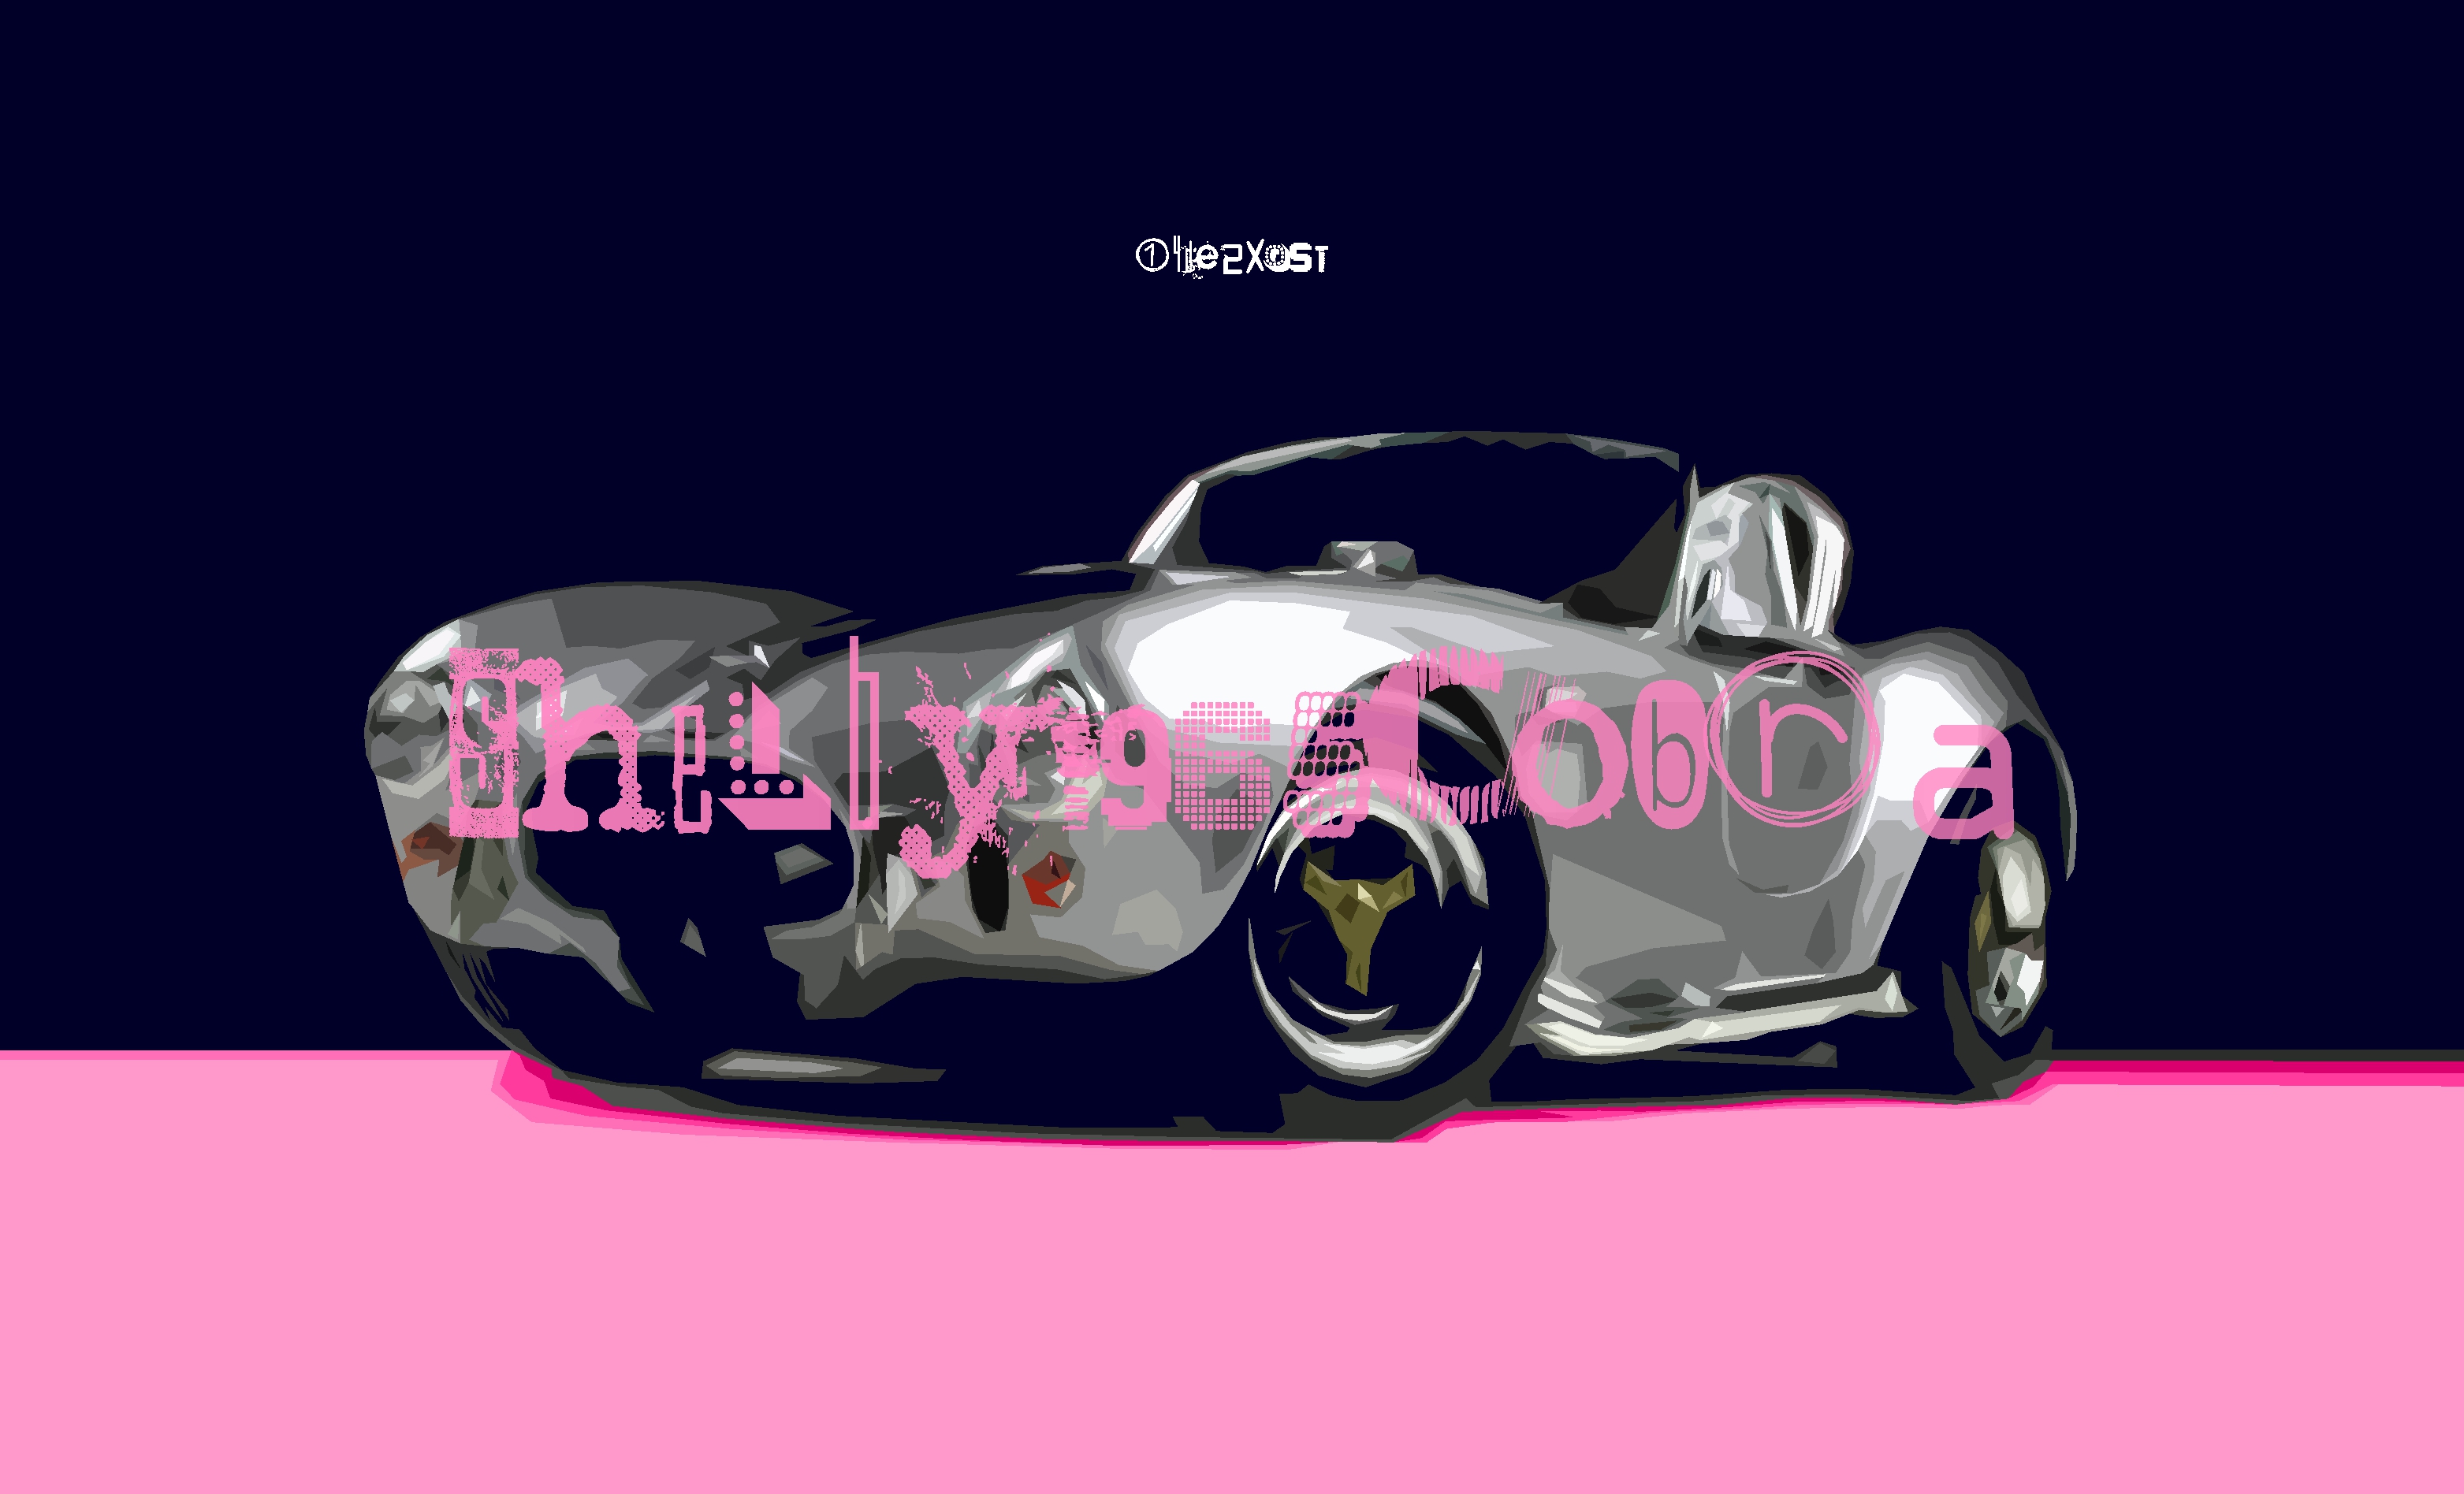 New Lock Screen Wallpapers vehicles, shelby, car, pink, silver car